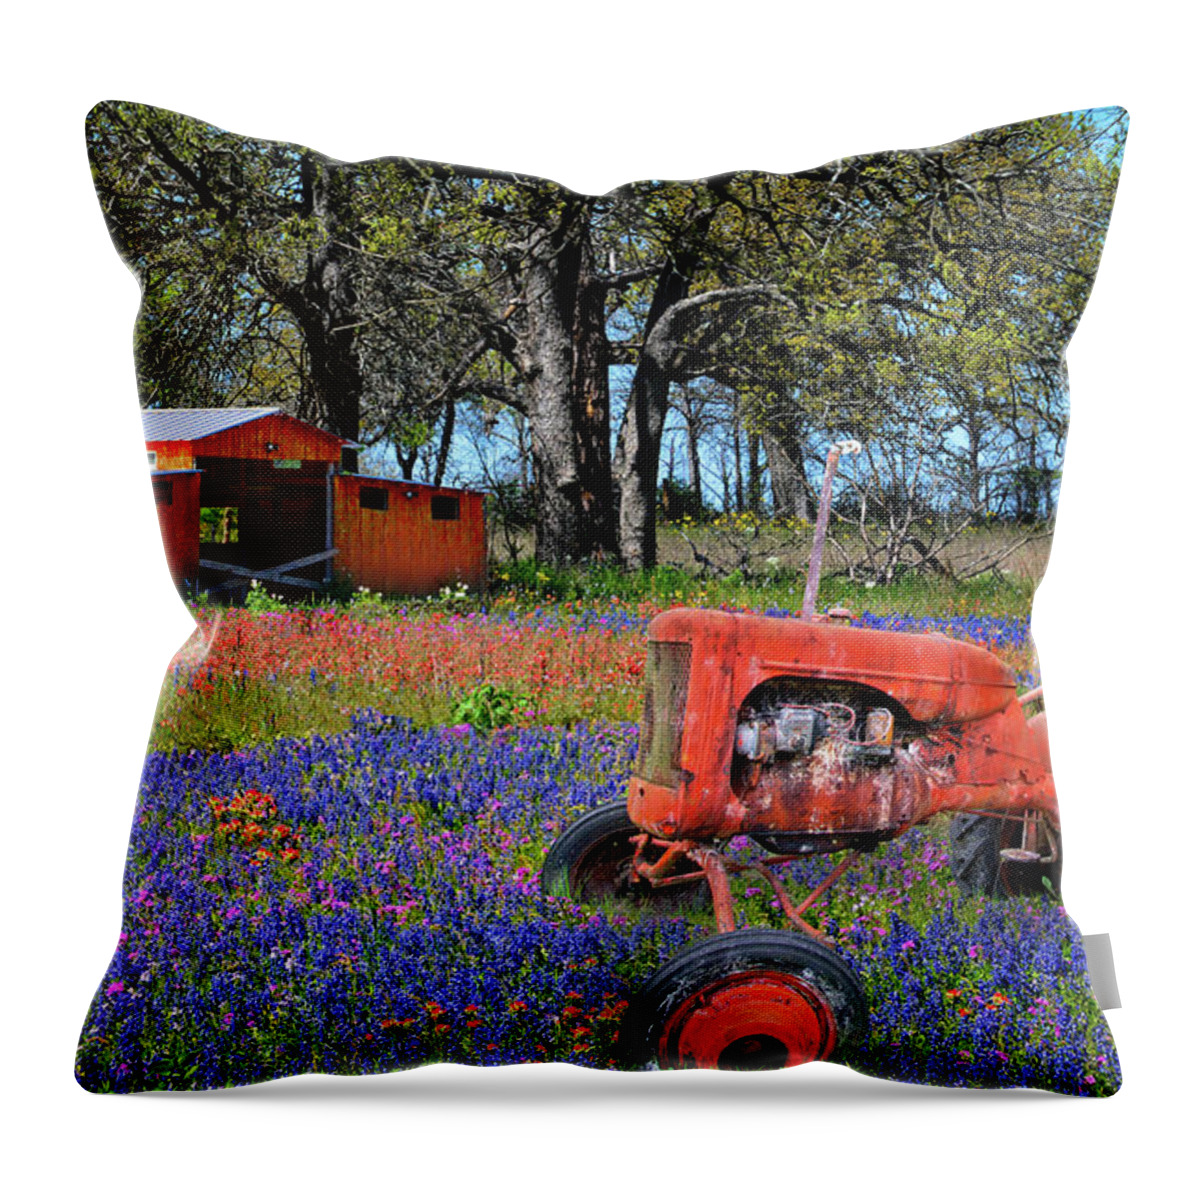 Texas Hill Country Throw Pillow featuring the photograph Red All About It by Lynn Bauer